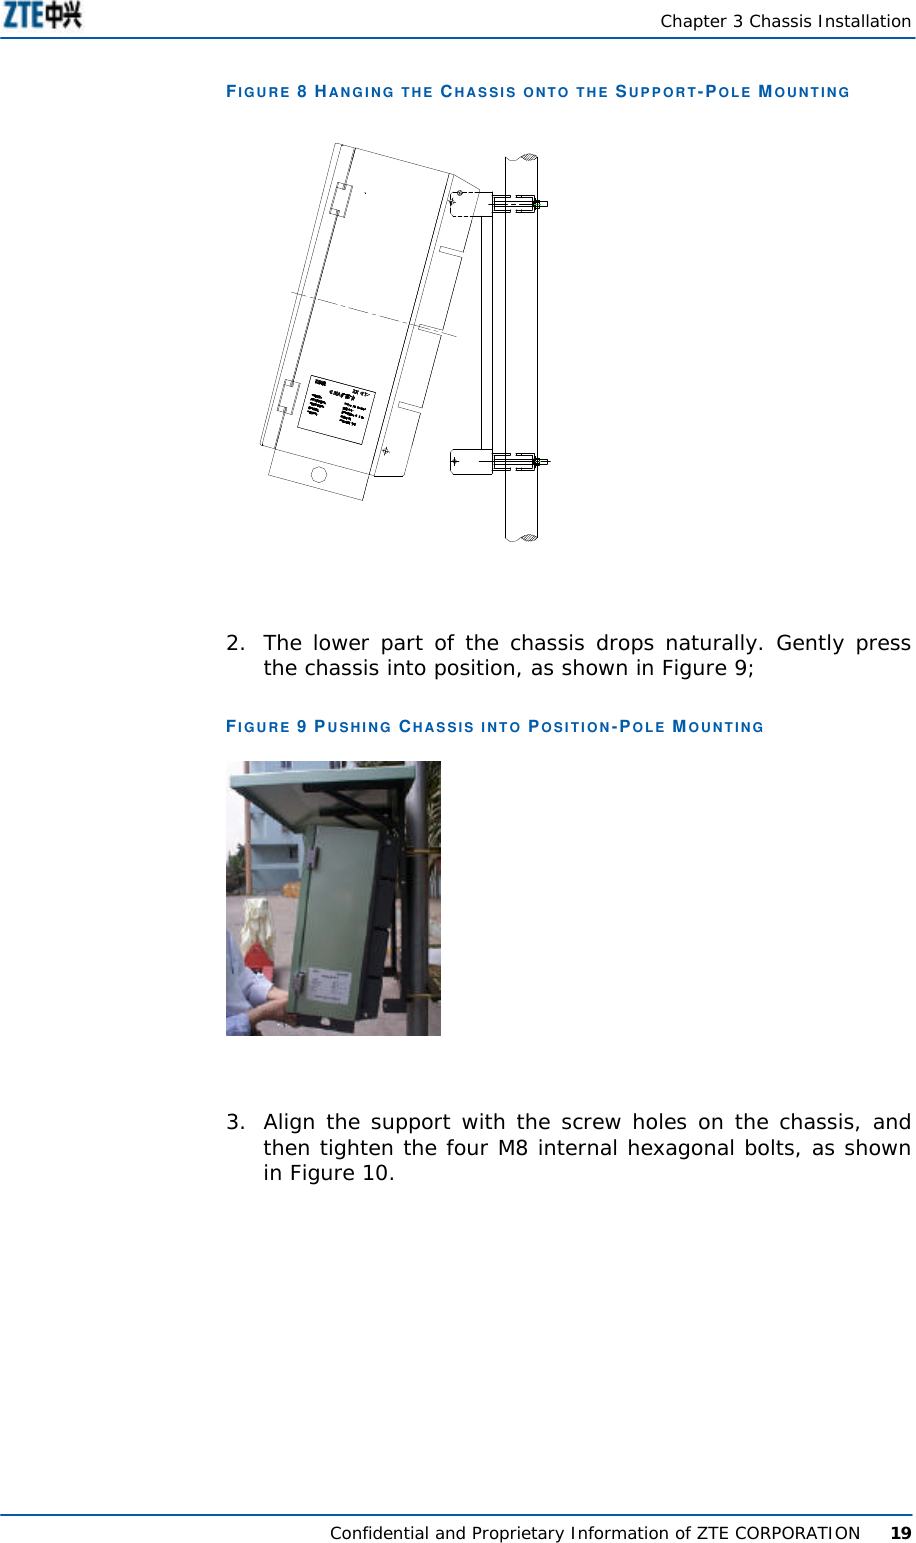   Chapter 3 Chassis Installation  Confidential and Proprietary Information of ZTE CORPORATION      19 FIGURE 8 HANGING THE CHASSIS ONTO THE SUPPORT-POLE MOUNTING    2. The lower part of the chassis drops naturally. Gently press the chassis into position, as shown in Figure 9; FIGURE 9 PUSHING CHASSIS INTO POSITION-POLE MOUNTING   3. Align the support with the screw holes on the chassis, and then tighten the four M8 internal hexagonal bolts, as shown in Figure 10.  